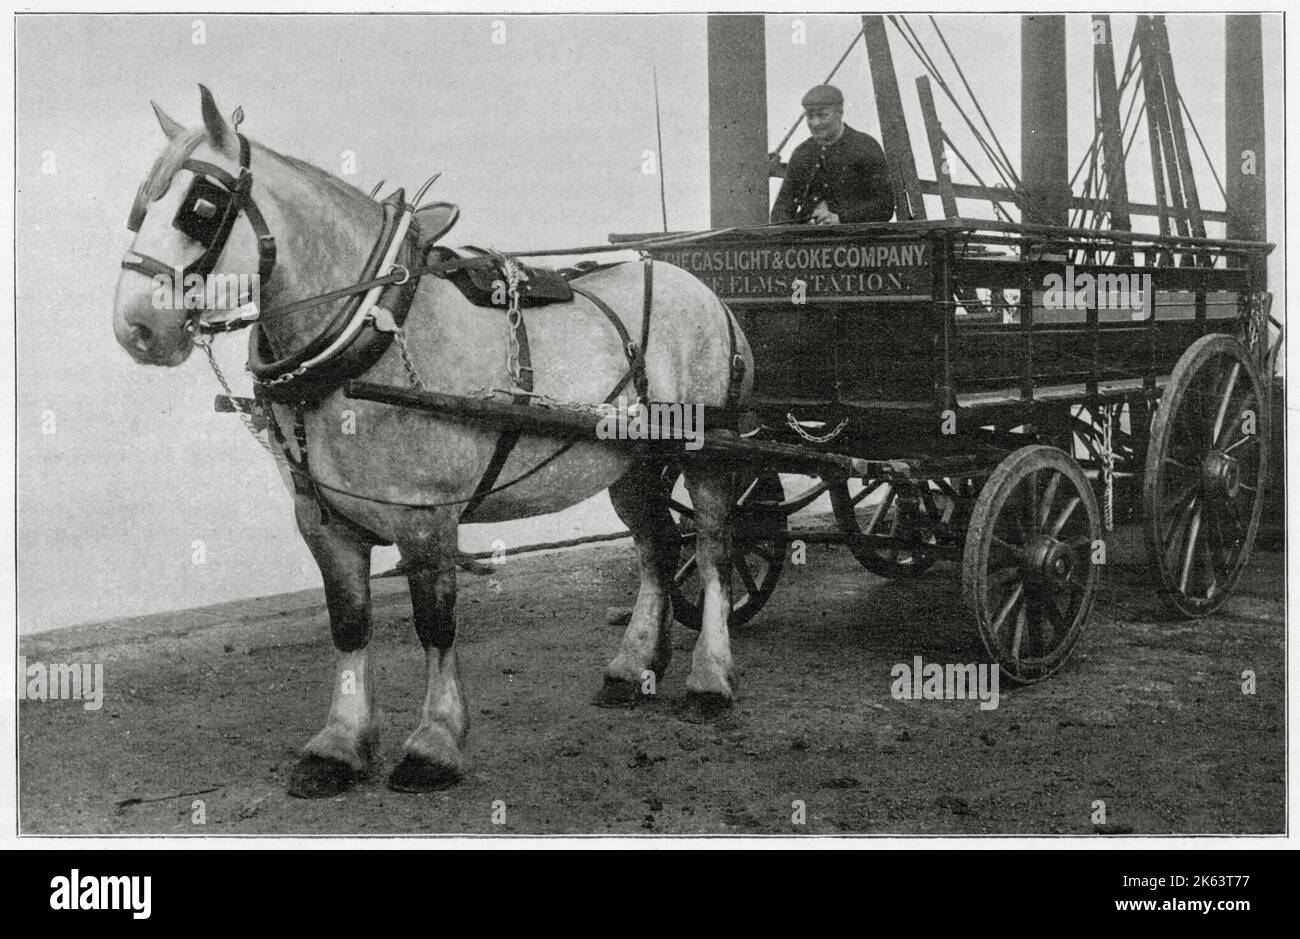 Gas Light & Coke Company in Nine Elms on the south bank of the River Thames, photograph showing their shire horse and carriage. Stock Photo